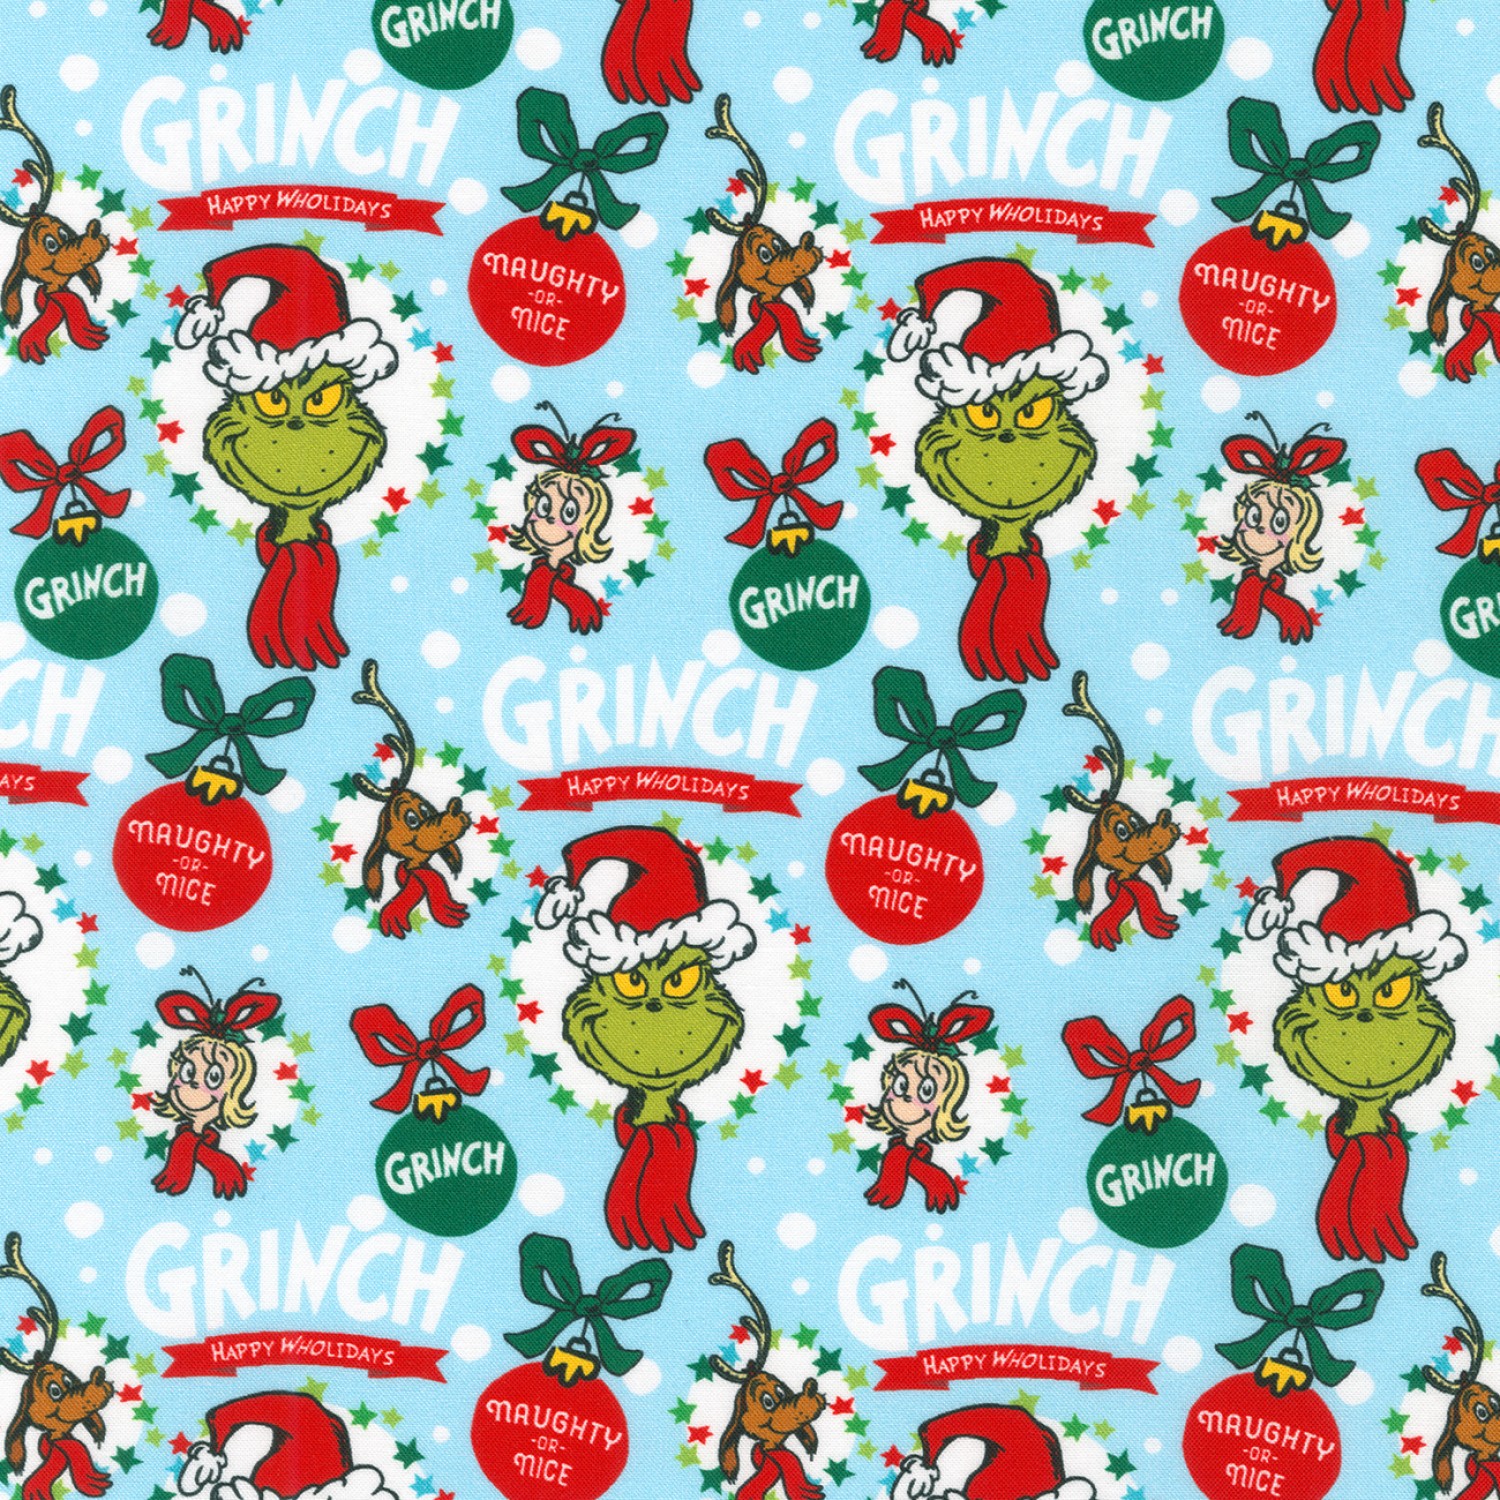 How the Grinch Stole Christmas Ornaments ADE20278223 – Honeycomb Quilts